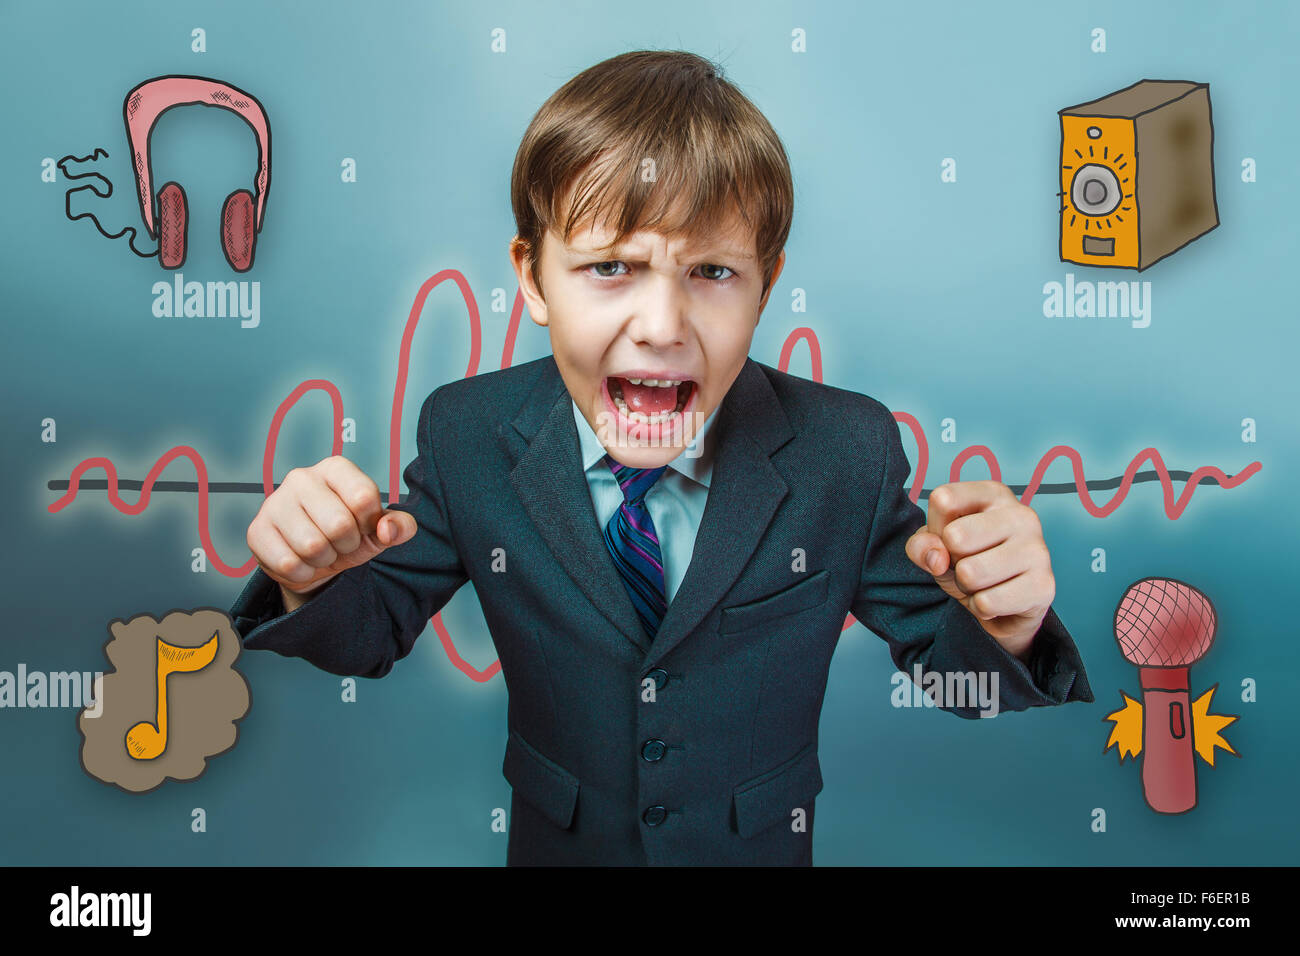 Teen boy businessman clenched his fists and yelling mouth open f Stock Photo